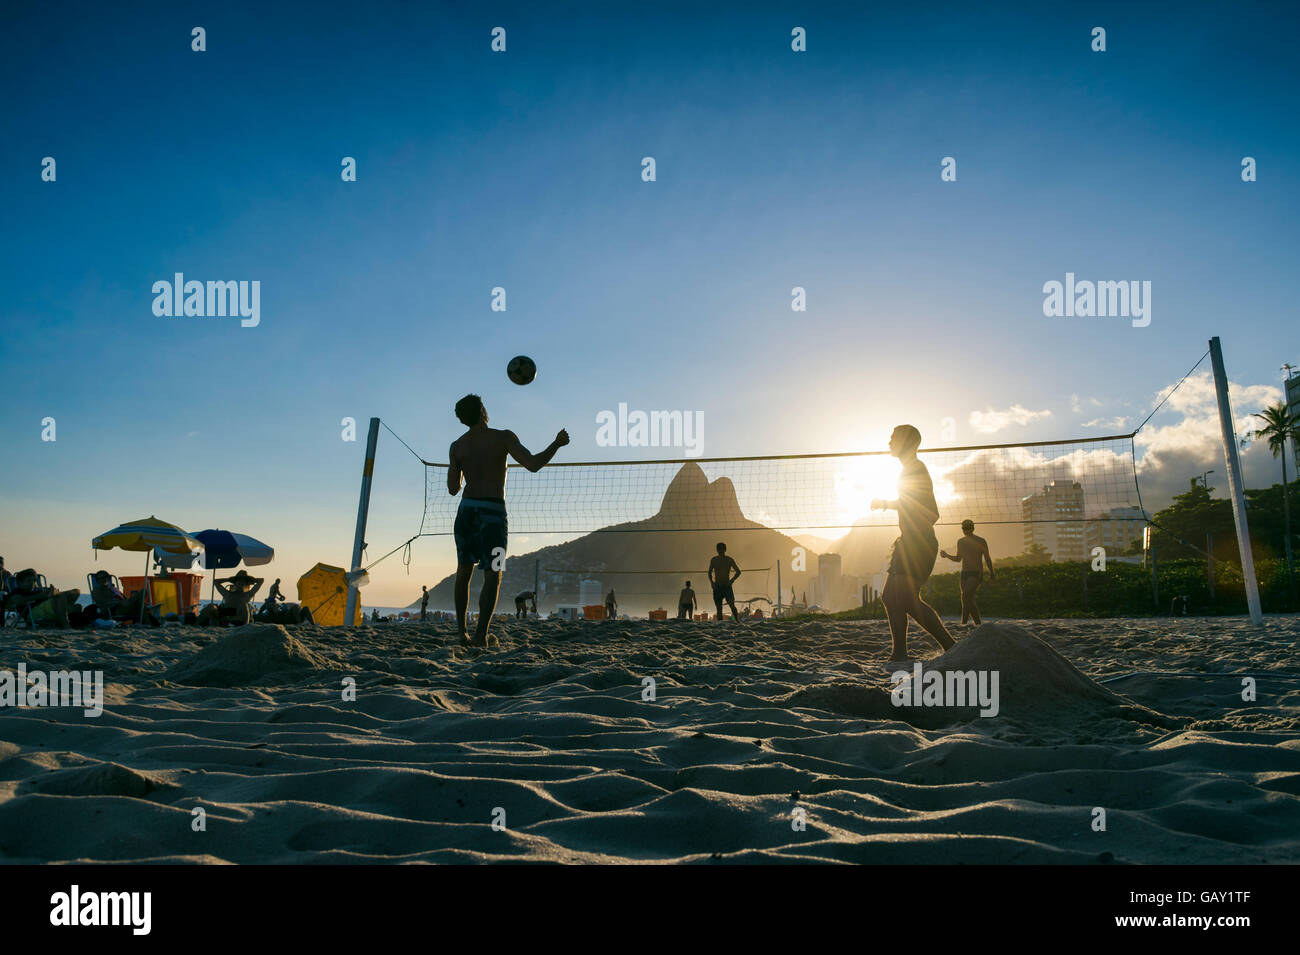 Silhouettes of Brazilians playing futevolei (footvolley, a game combining football/soccer and volleyball) in Ipanema, Rio Brazil Stock Photo